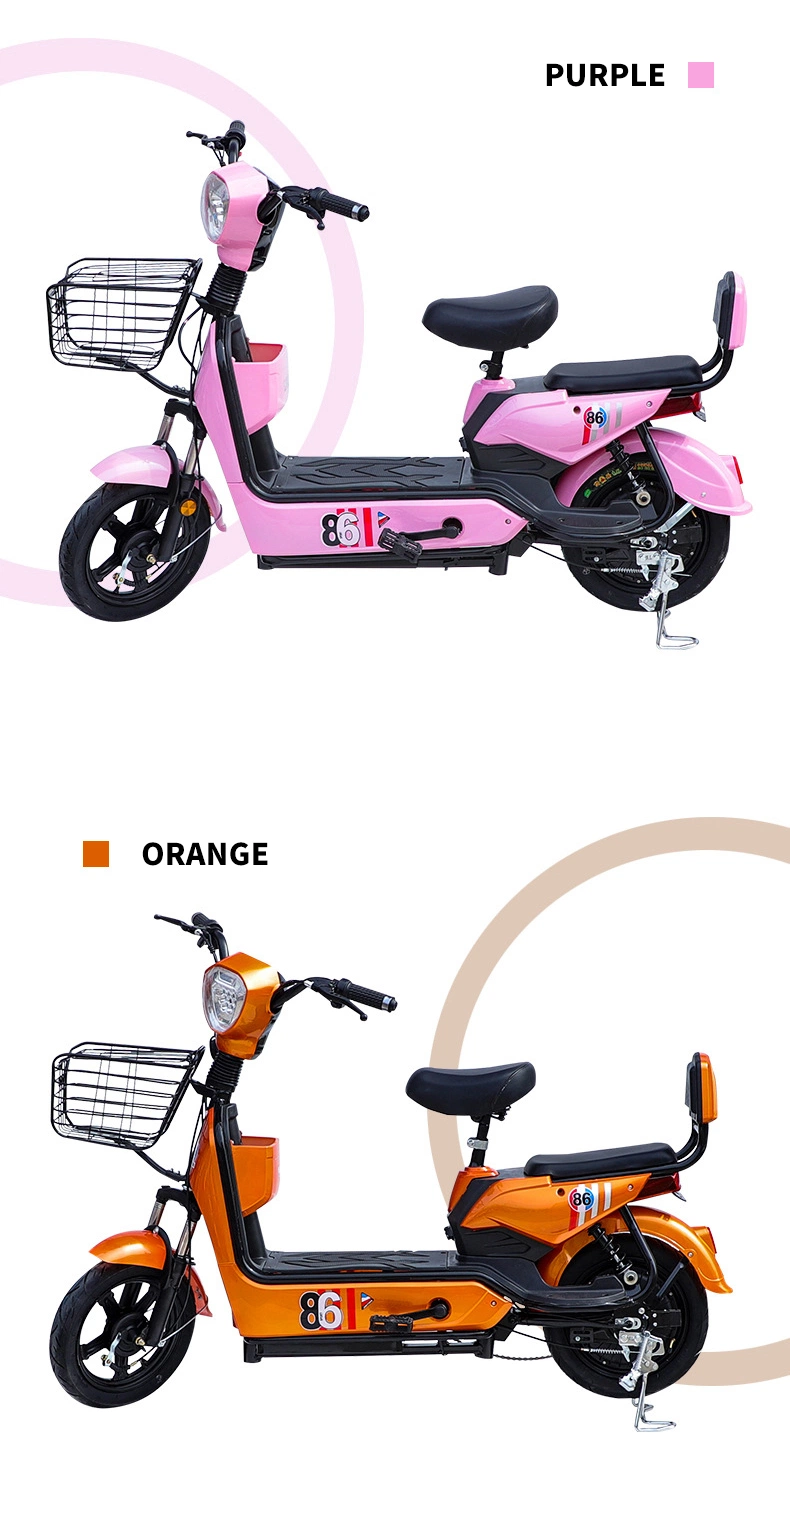 Ready to Ship 48V 350W Motor 14 Inch Fat Tire Electric Bicycle 12ah Battery Not Folding Electric Bike for Adult